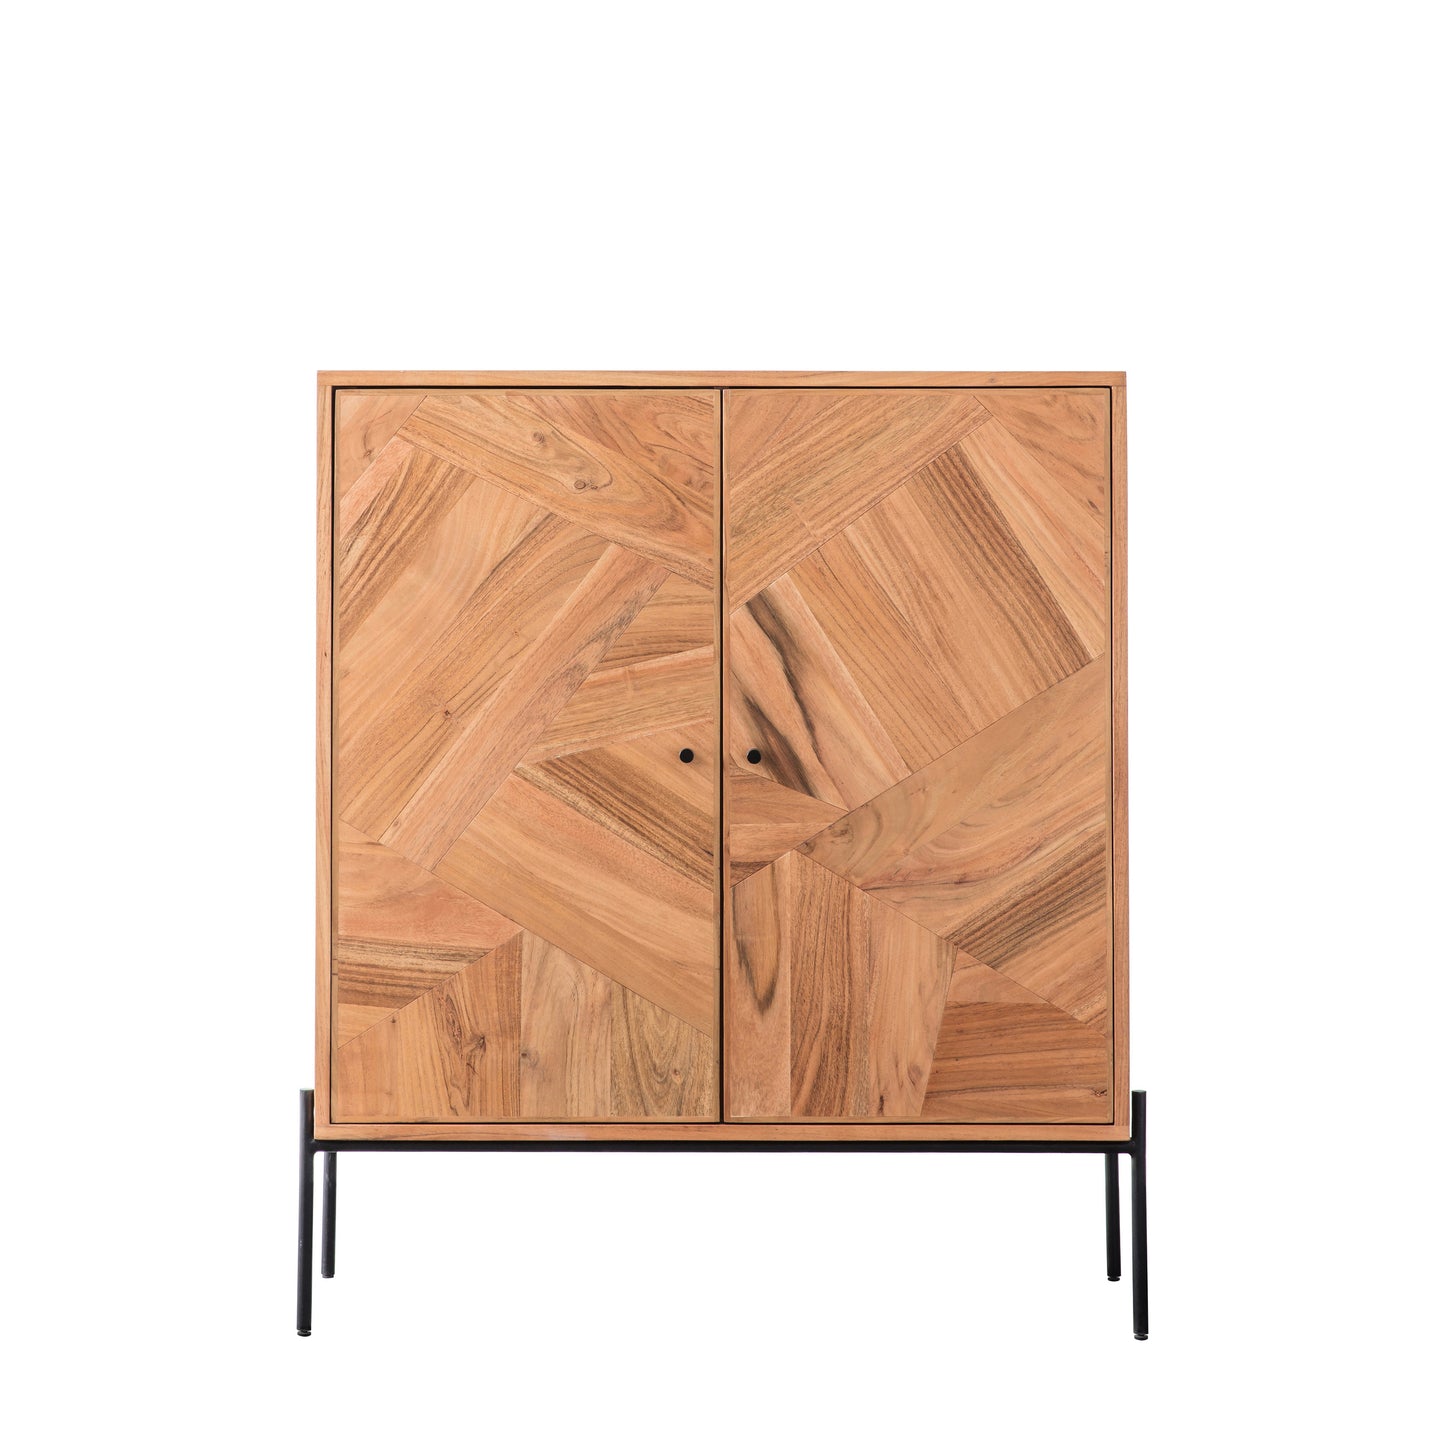 An Ashbury 2 Door Drinks Cabinet with black legs and a geometric pattern, perfect for interior decor and home furniture.